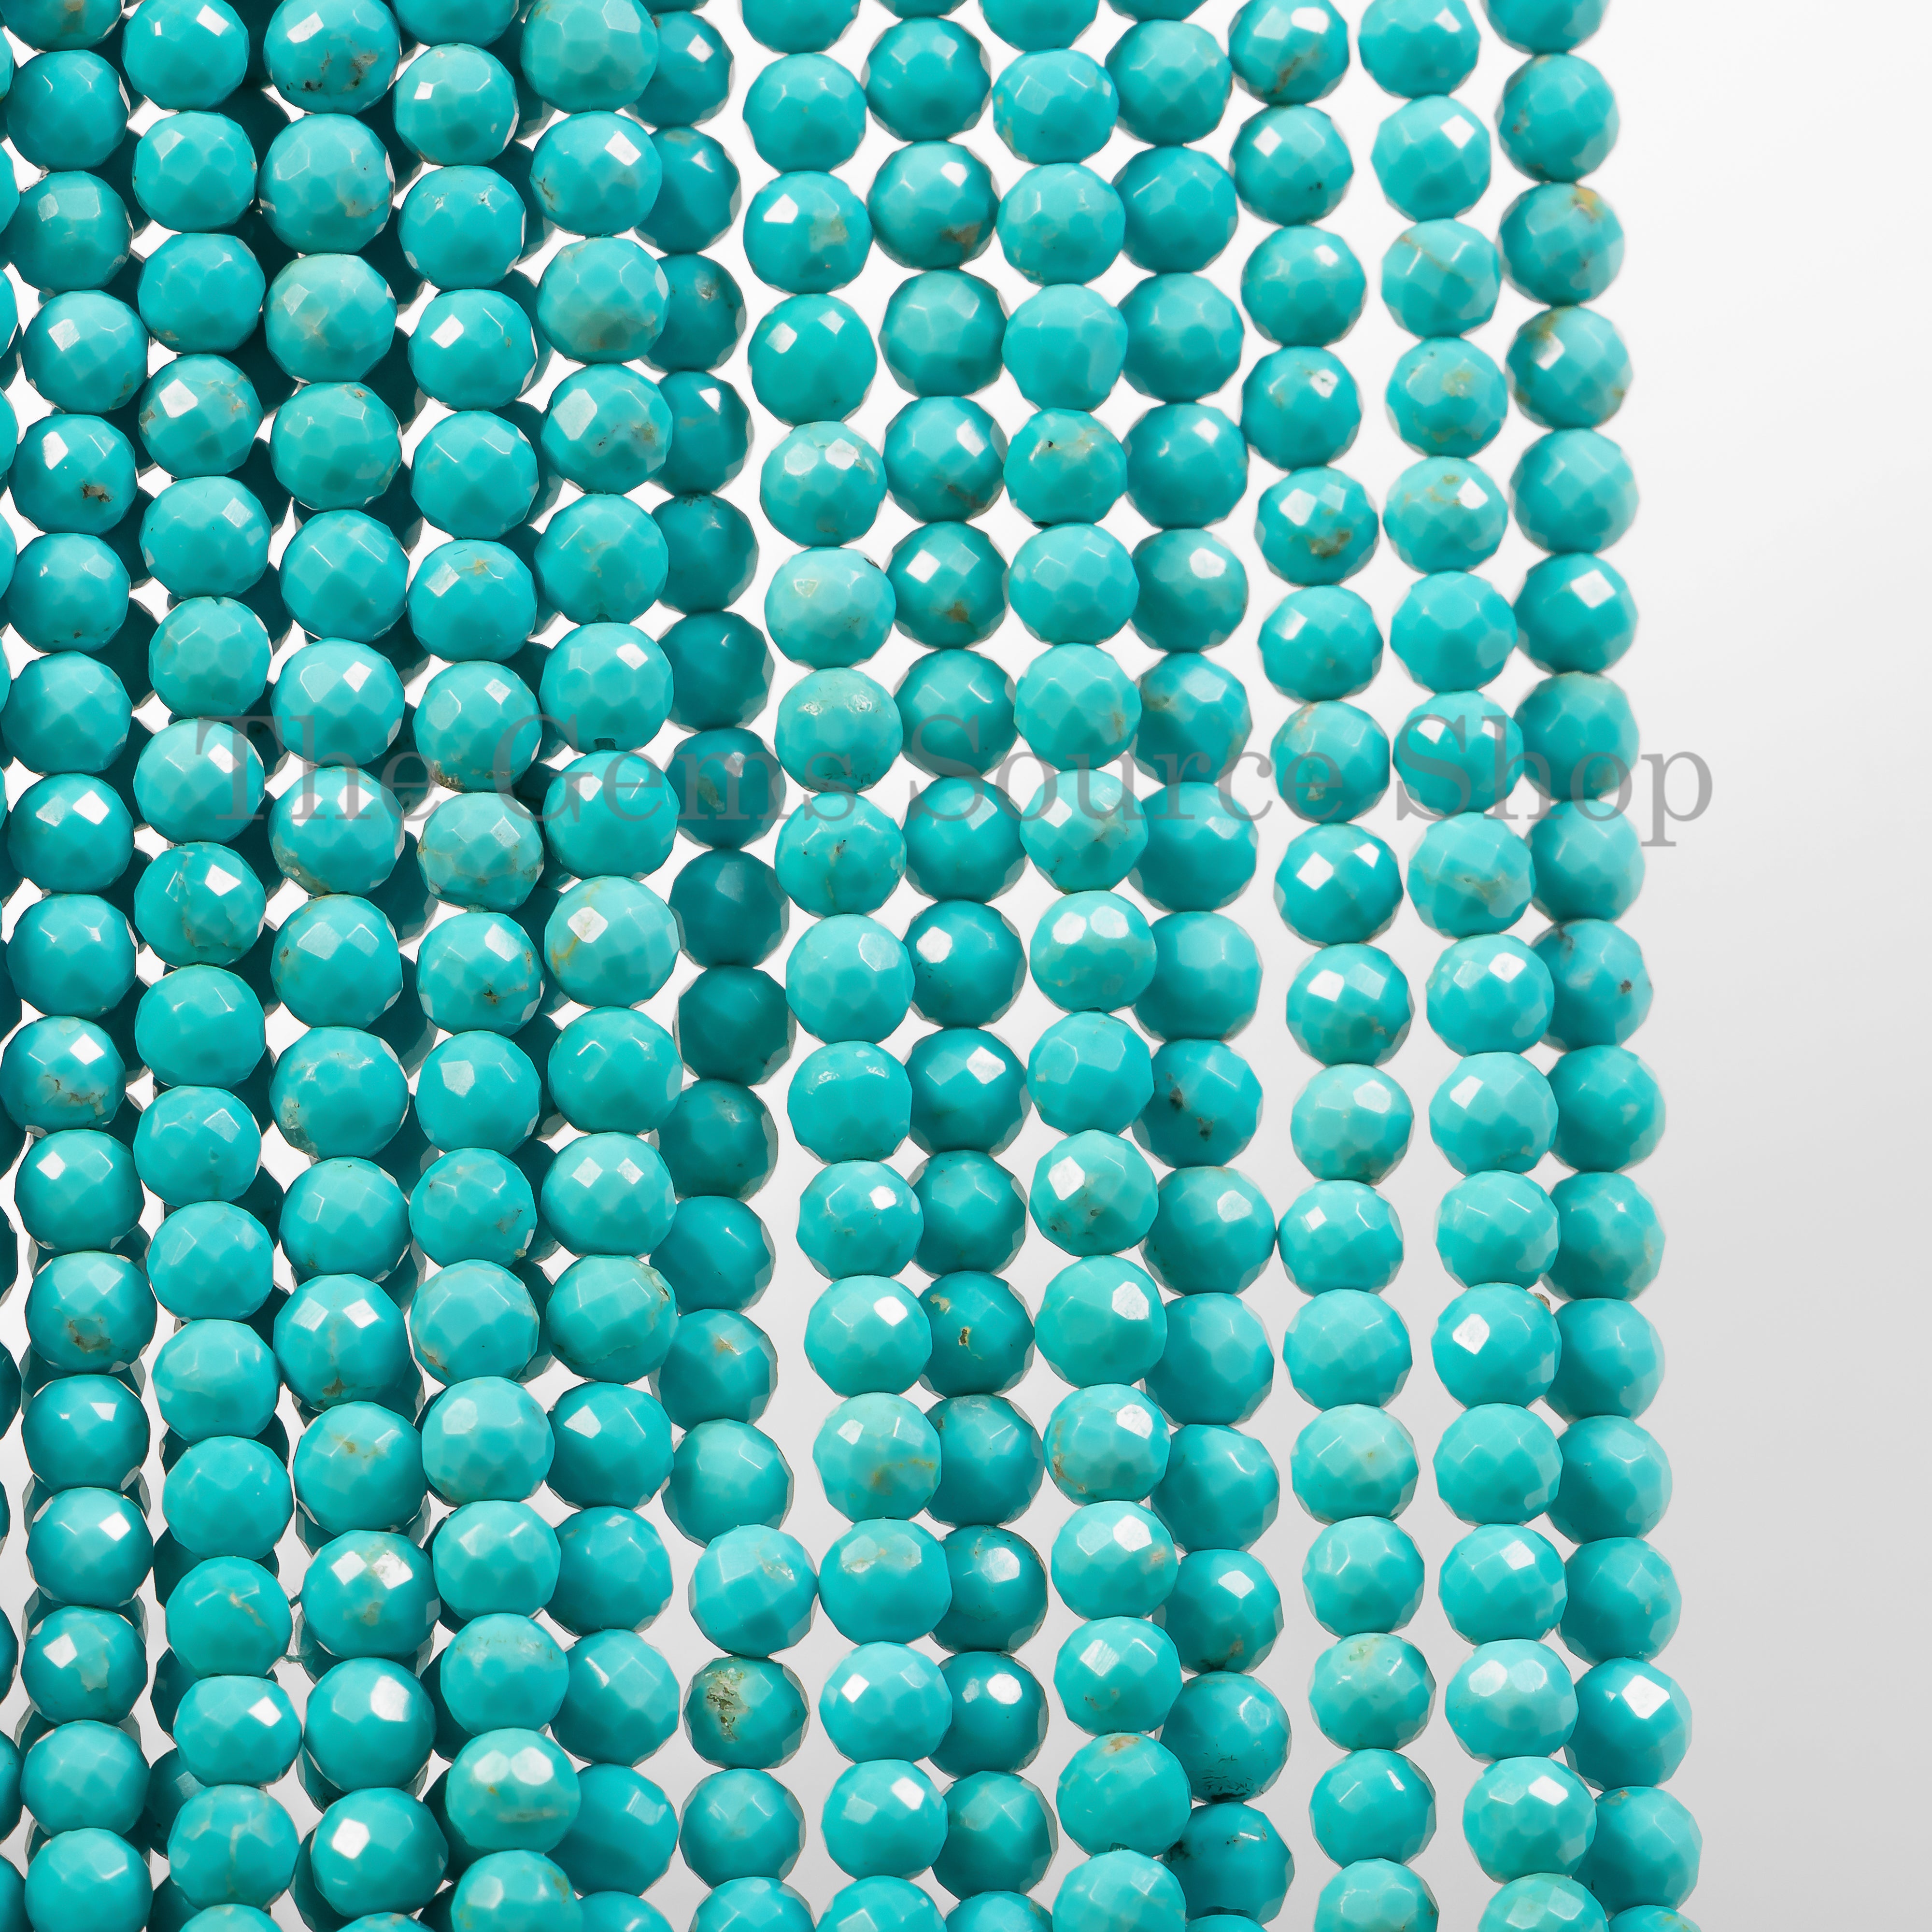 Natural Turquoise Beads, 4-4.75 mm Turquoise Round Beads TGS-4634